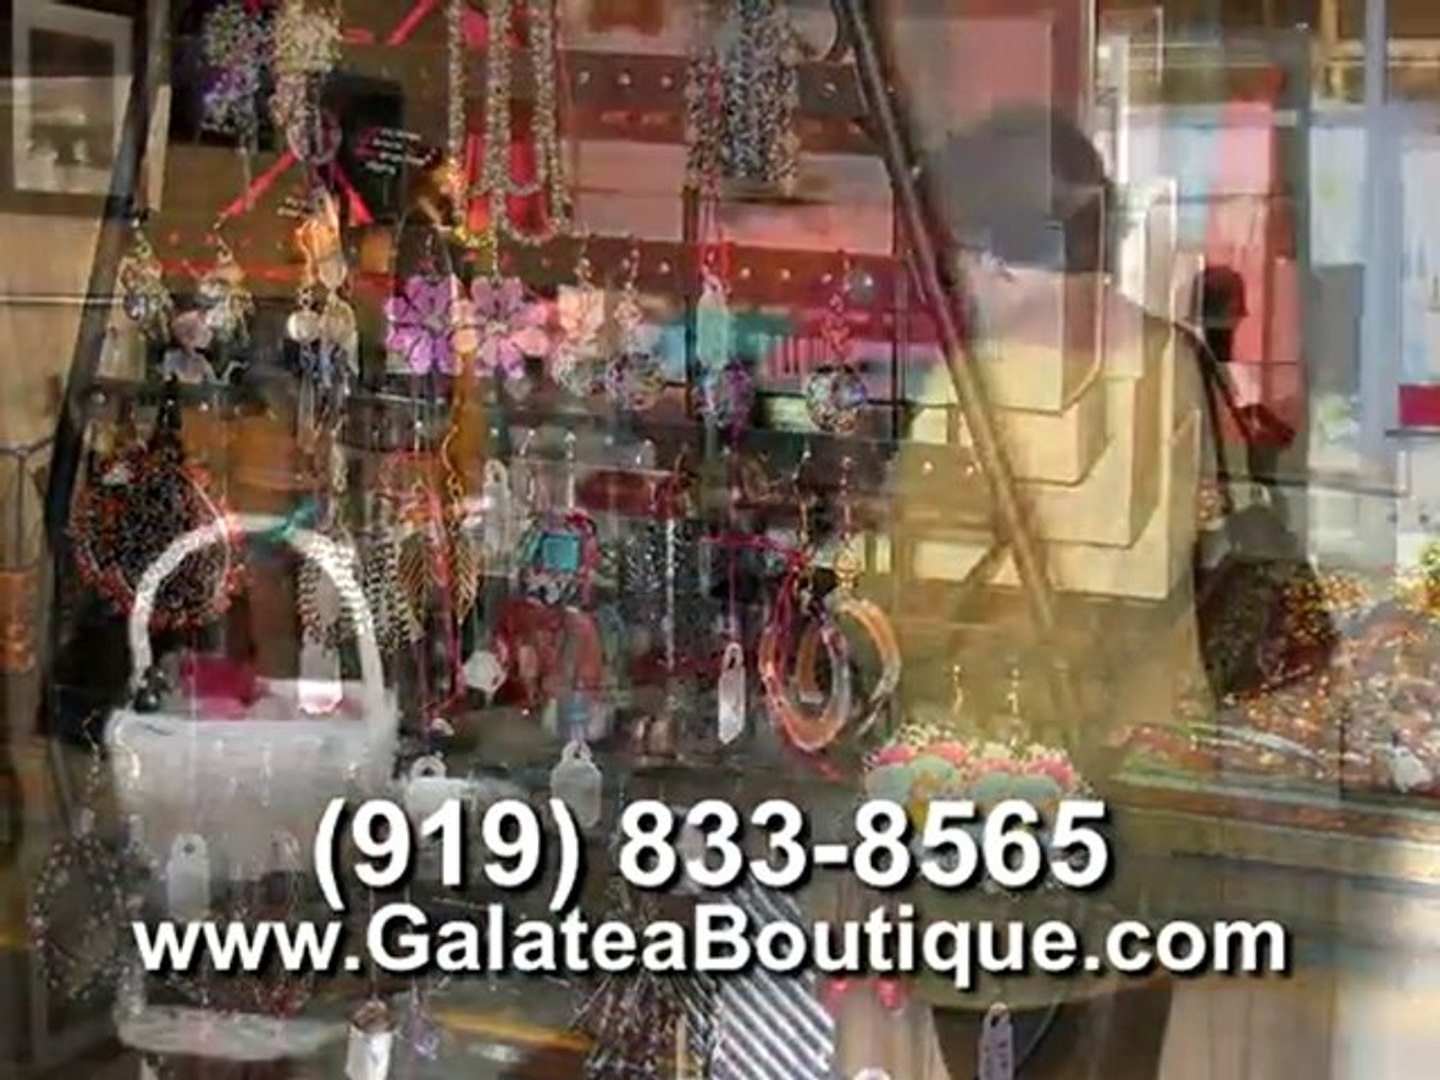 Raleigh NC Boutique Fashion Clothing Store